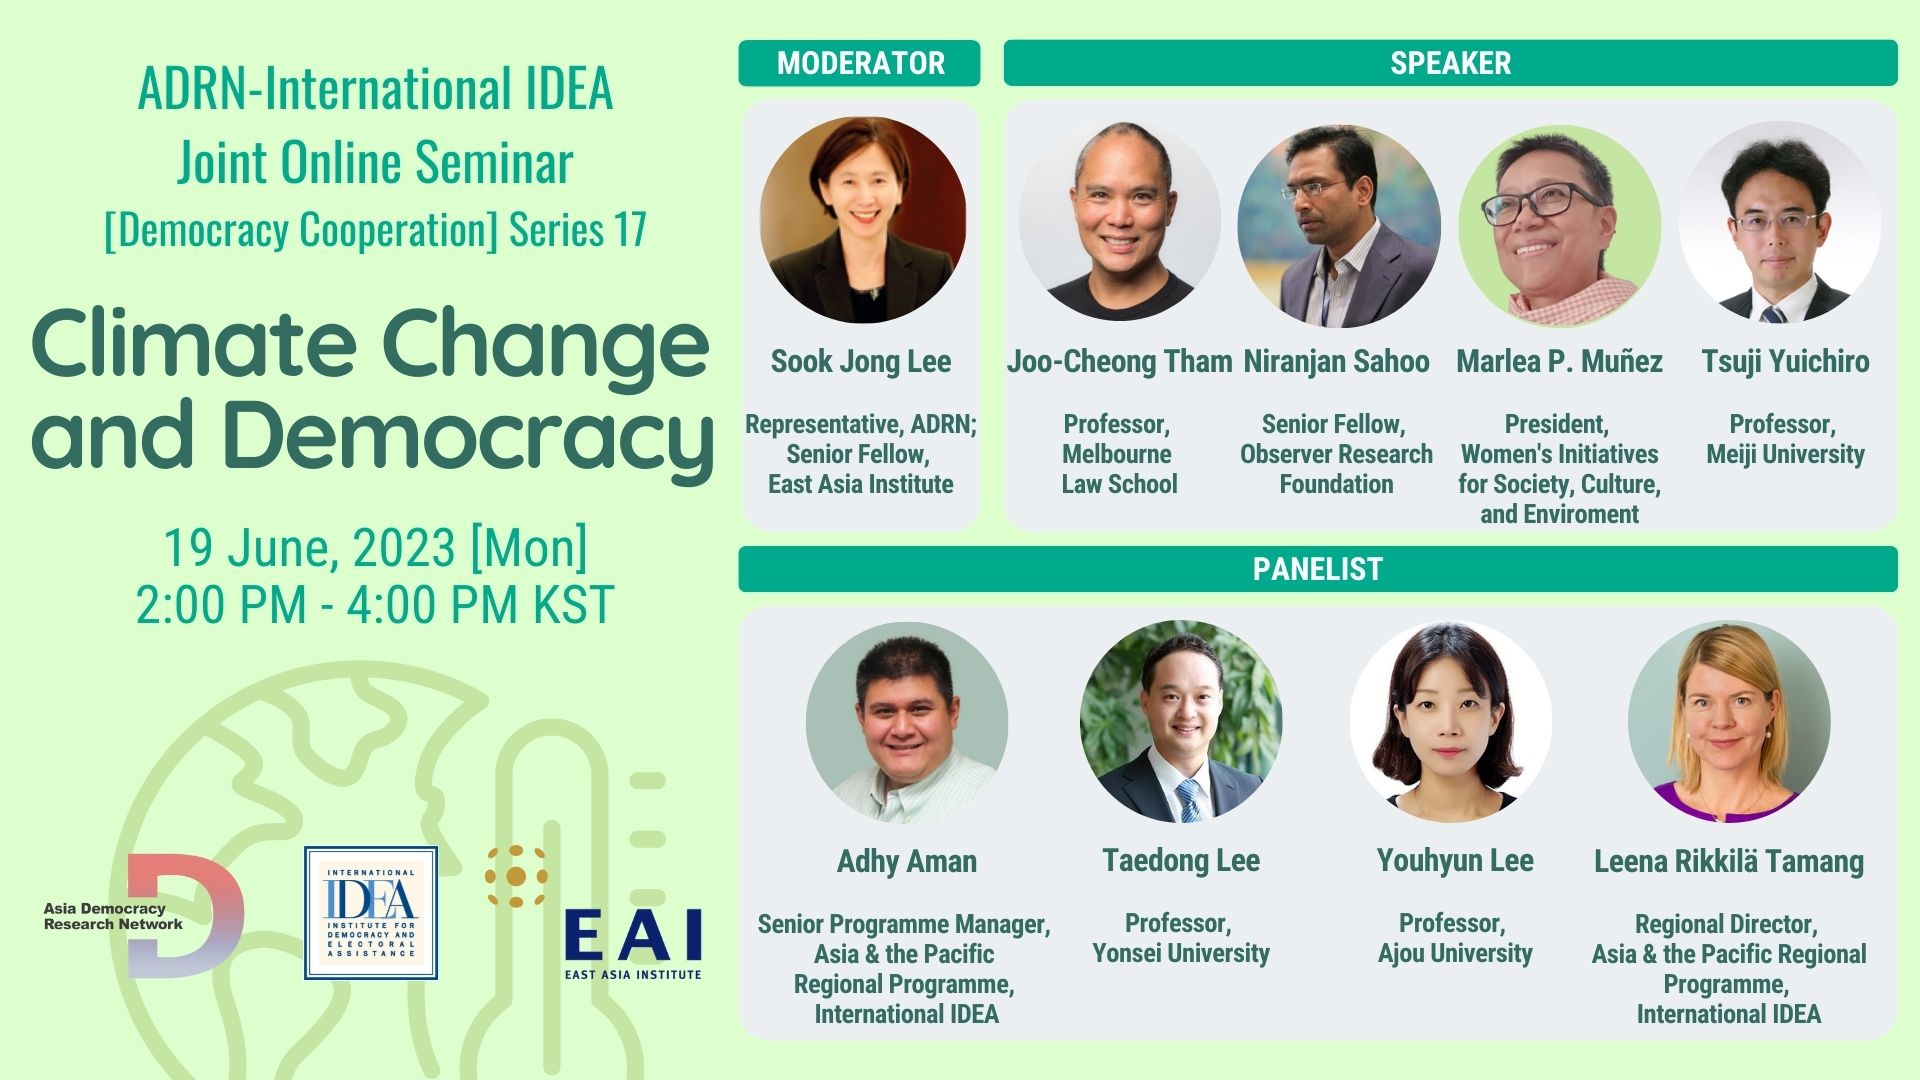 [ADRN-International IDEA Joint Online Seminar] Climate Change and Democracy